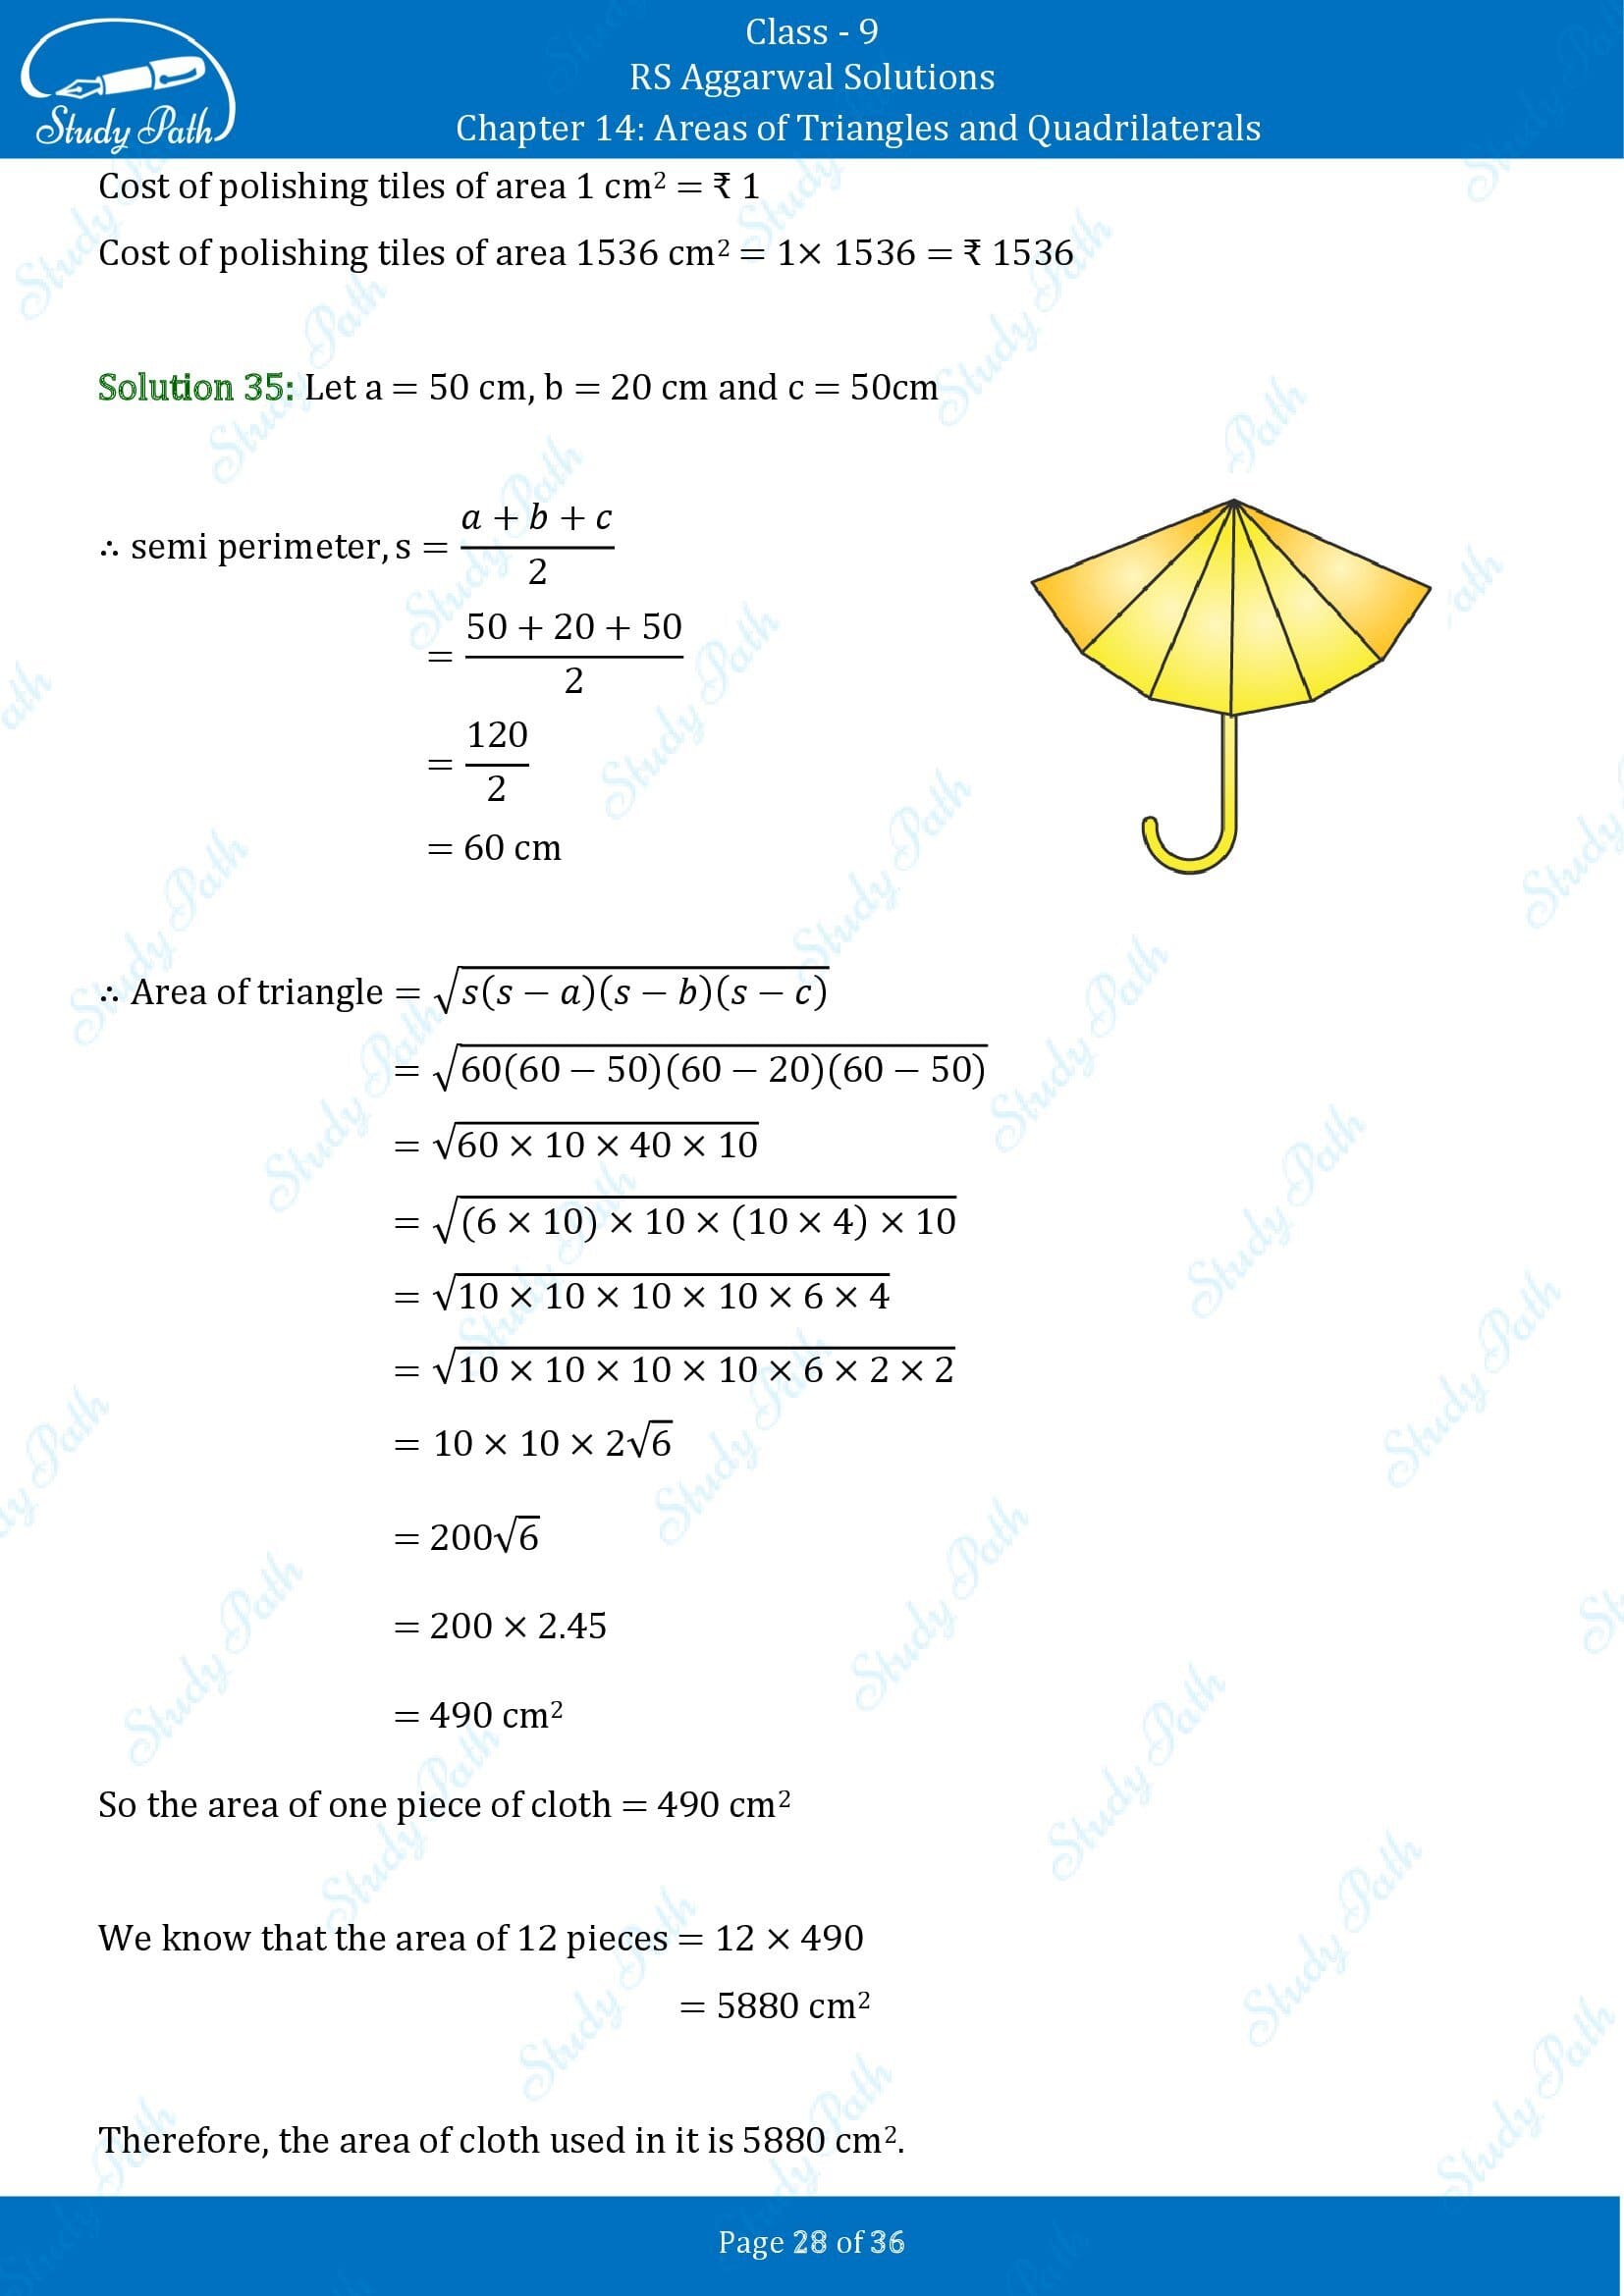 RS Aggarwal Solutions Class 9 Chapter 14 Areas of Triangles and Quadrilaterals Exercise 14 00028